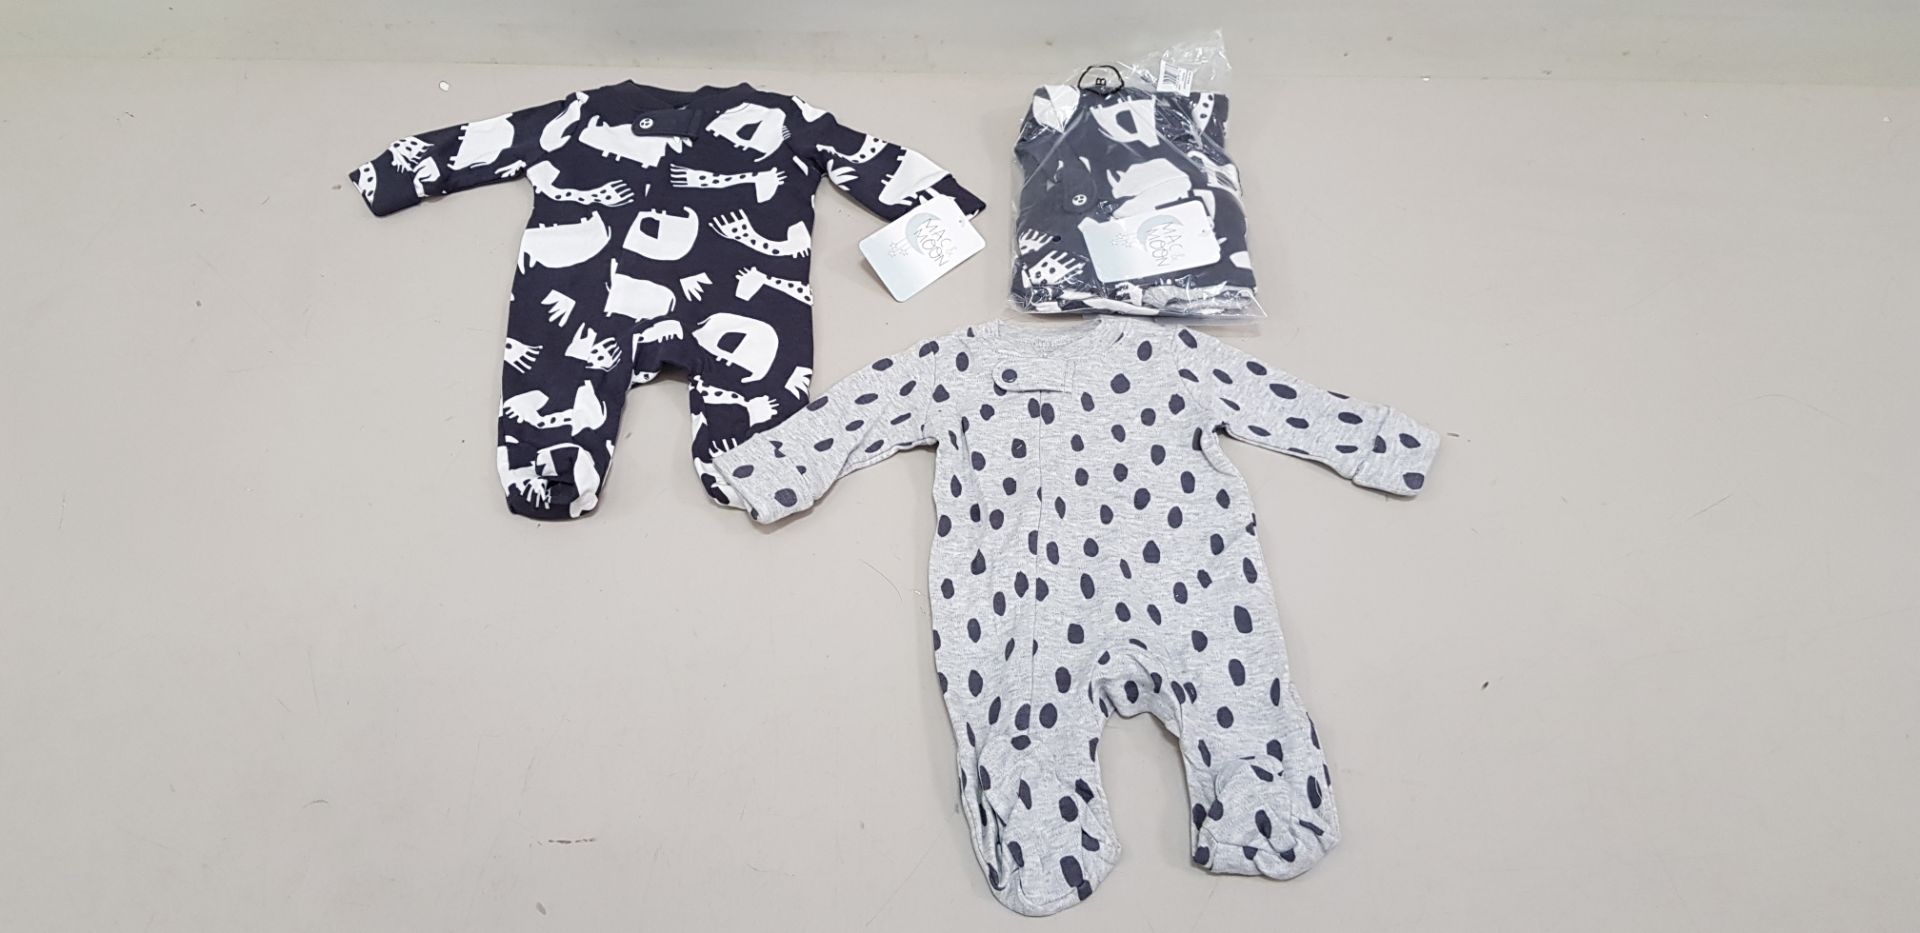 25 X BRAND NEW MAC AND MOON 2 PACK OF BABY GROWS UK SIZE 3 MONTHS